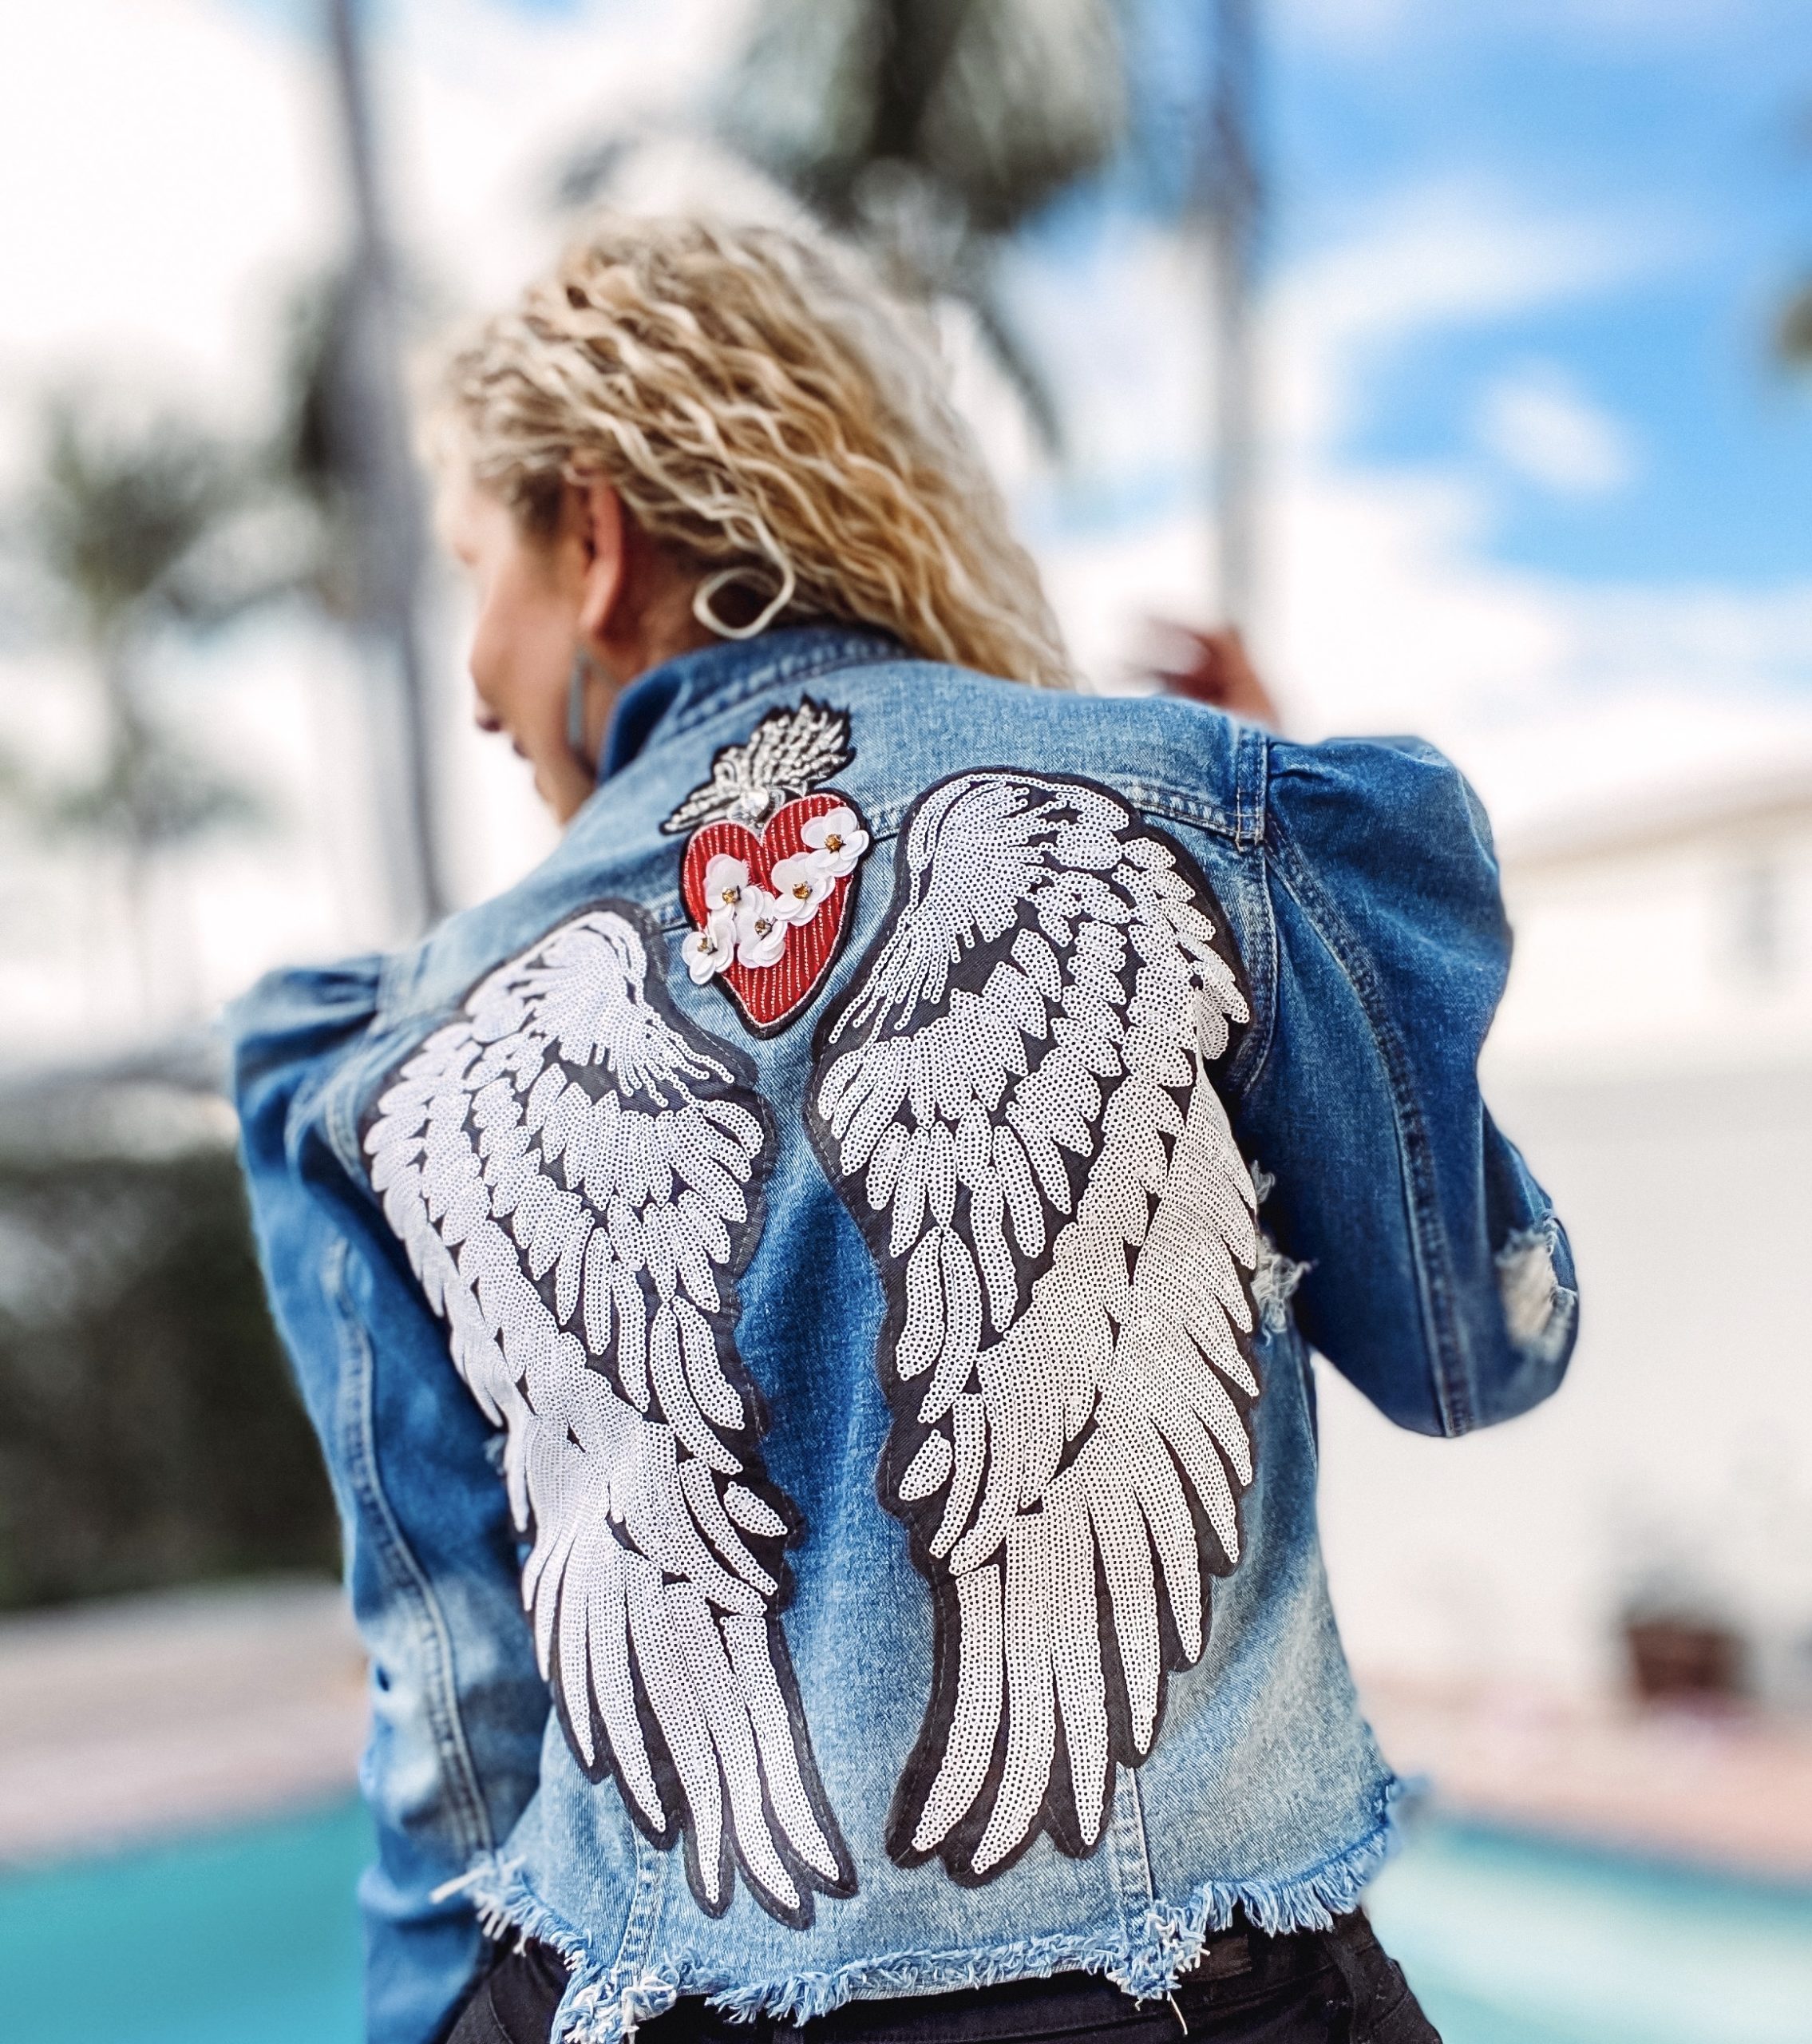 Embellished jean jackets are my newest obsession